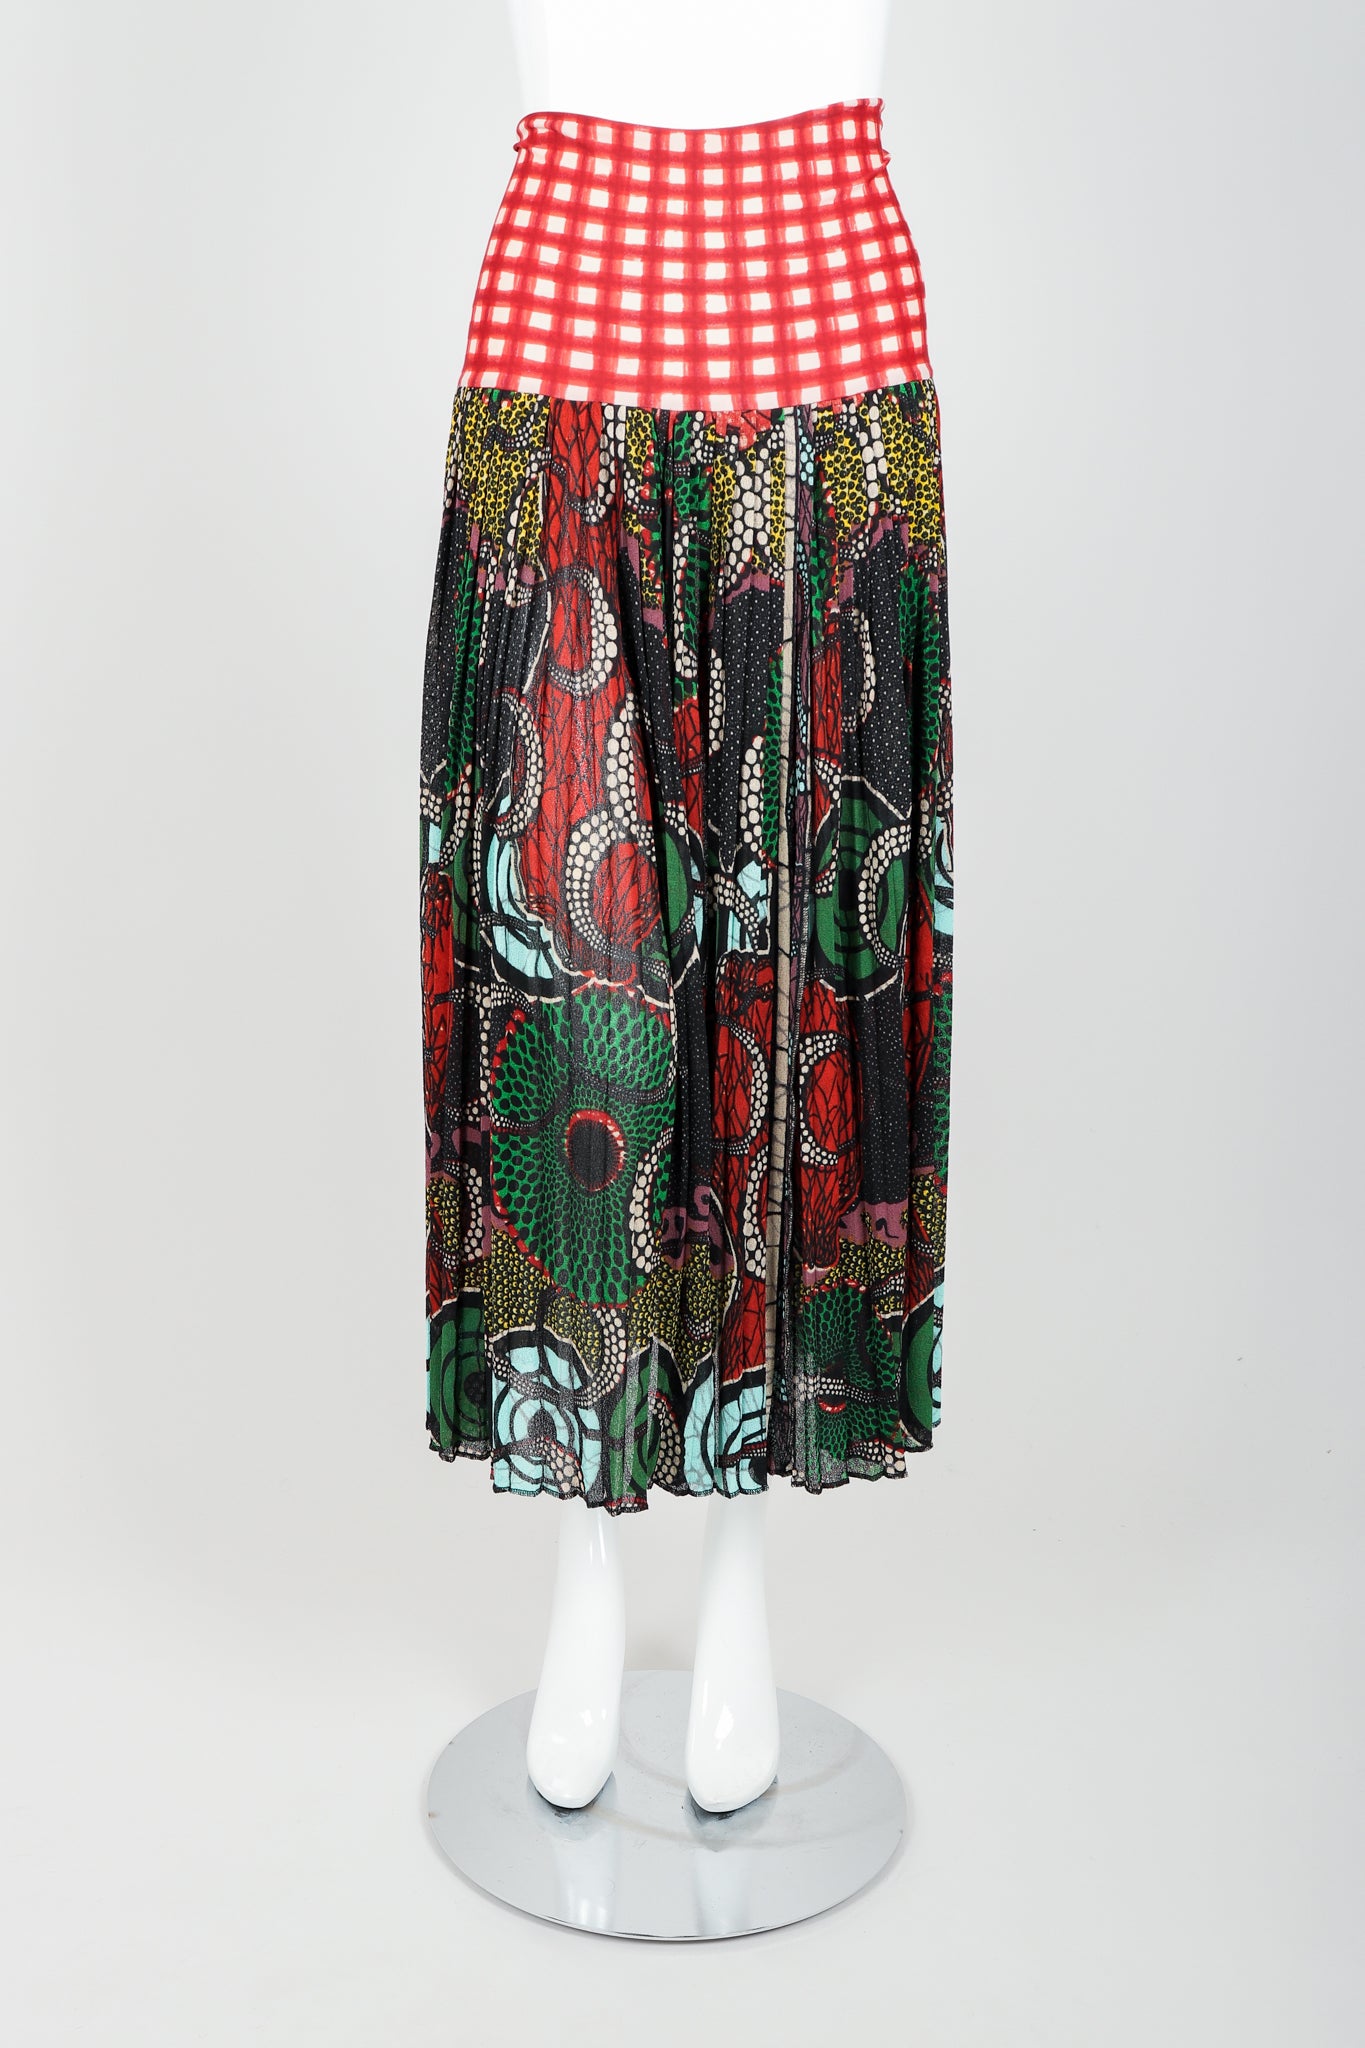 Vintage Jean Paul Gaultier Soleil Wax Print Skirt on Mannequin front at Recess Los Angeles